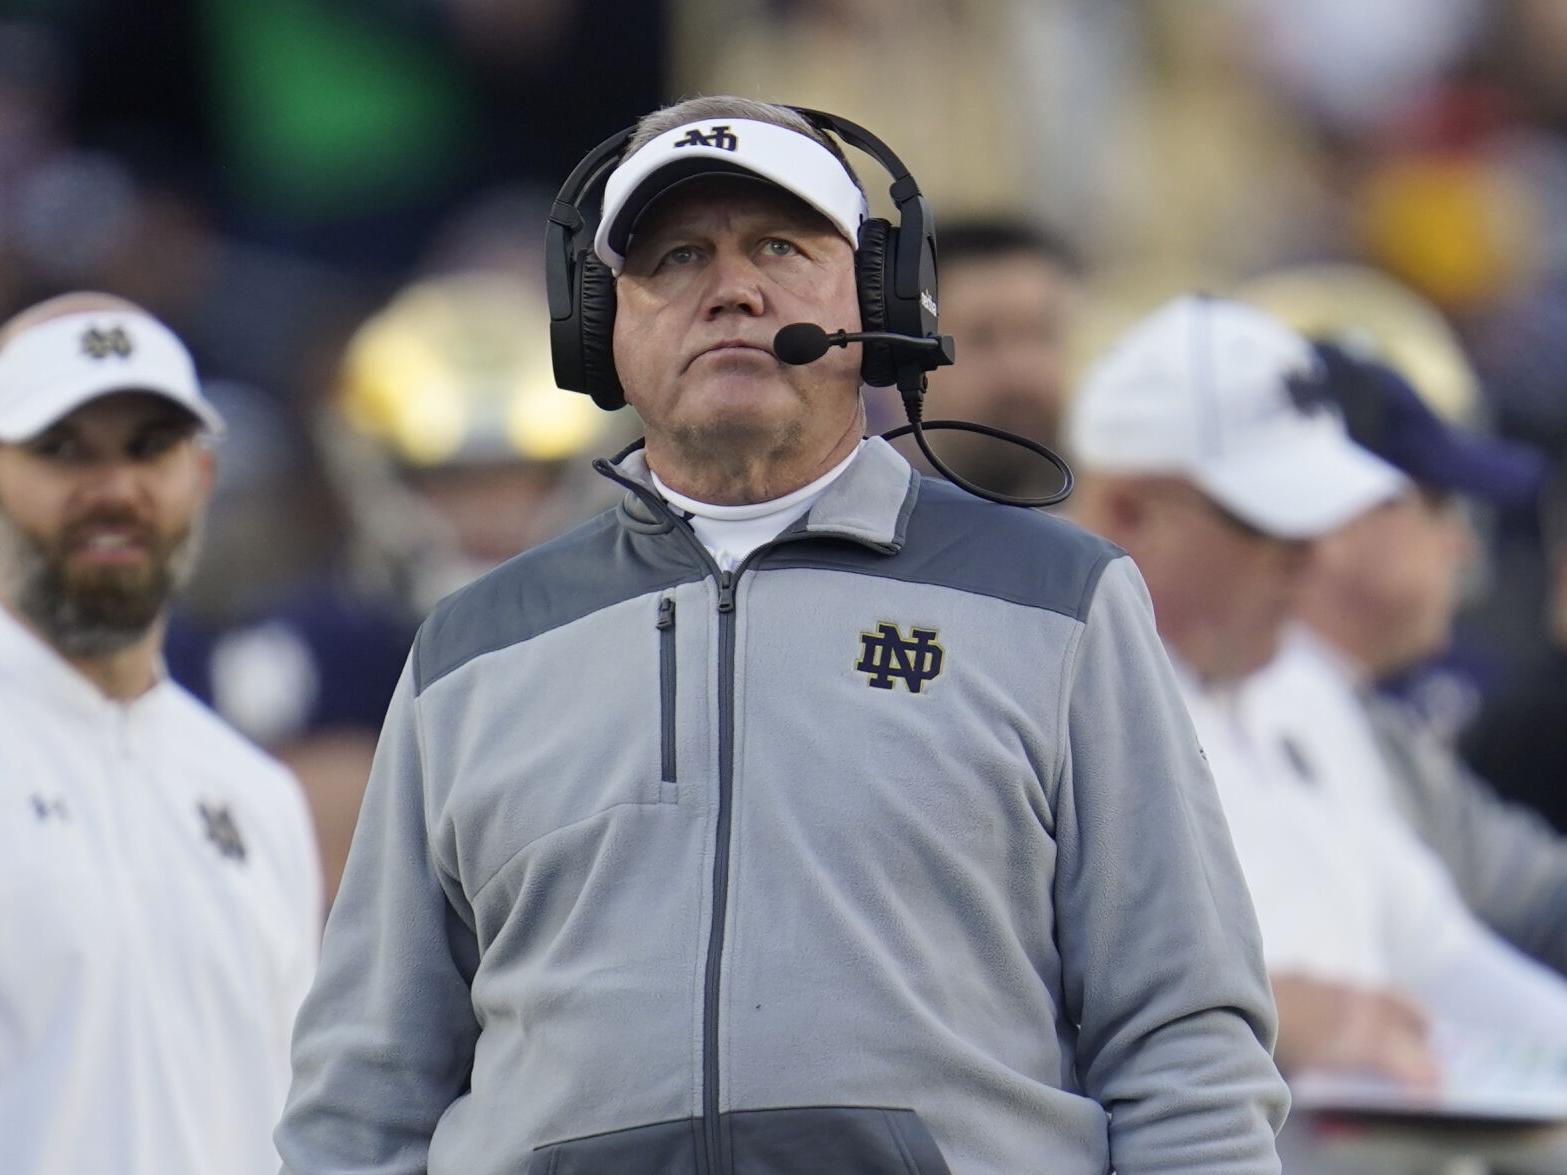 New LSU coach Brian Kelly to receive 10-year, $95 million contract | LSU |  